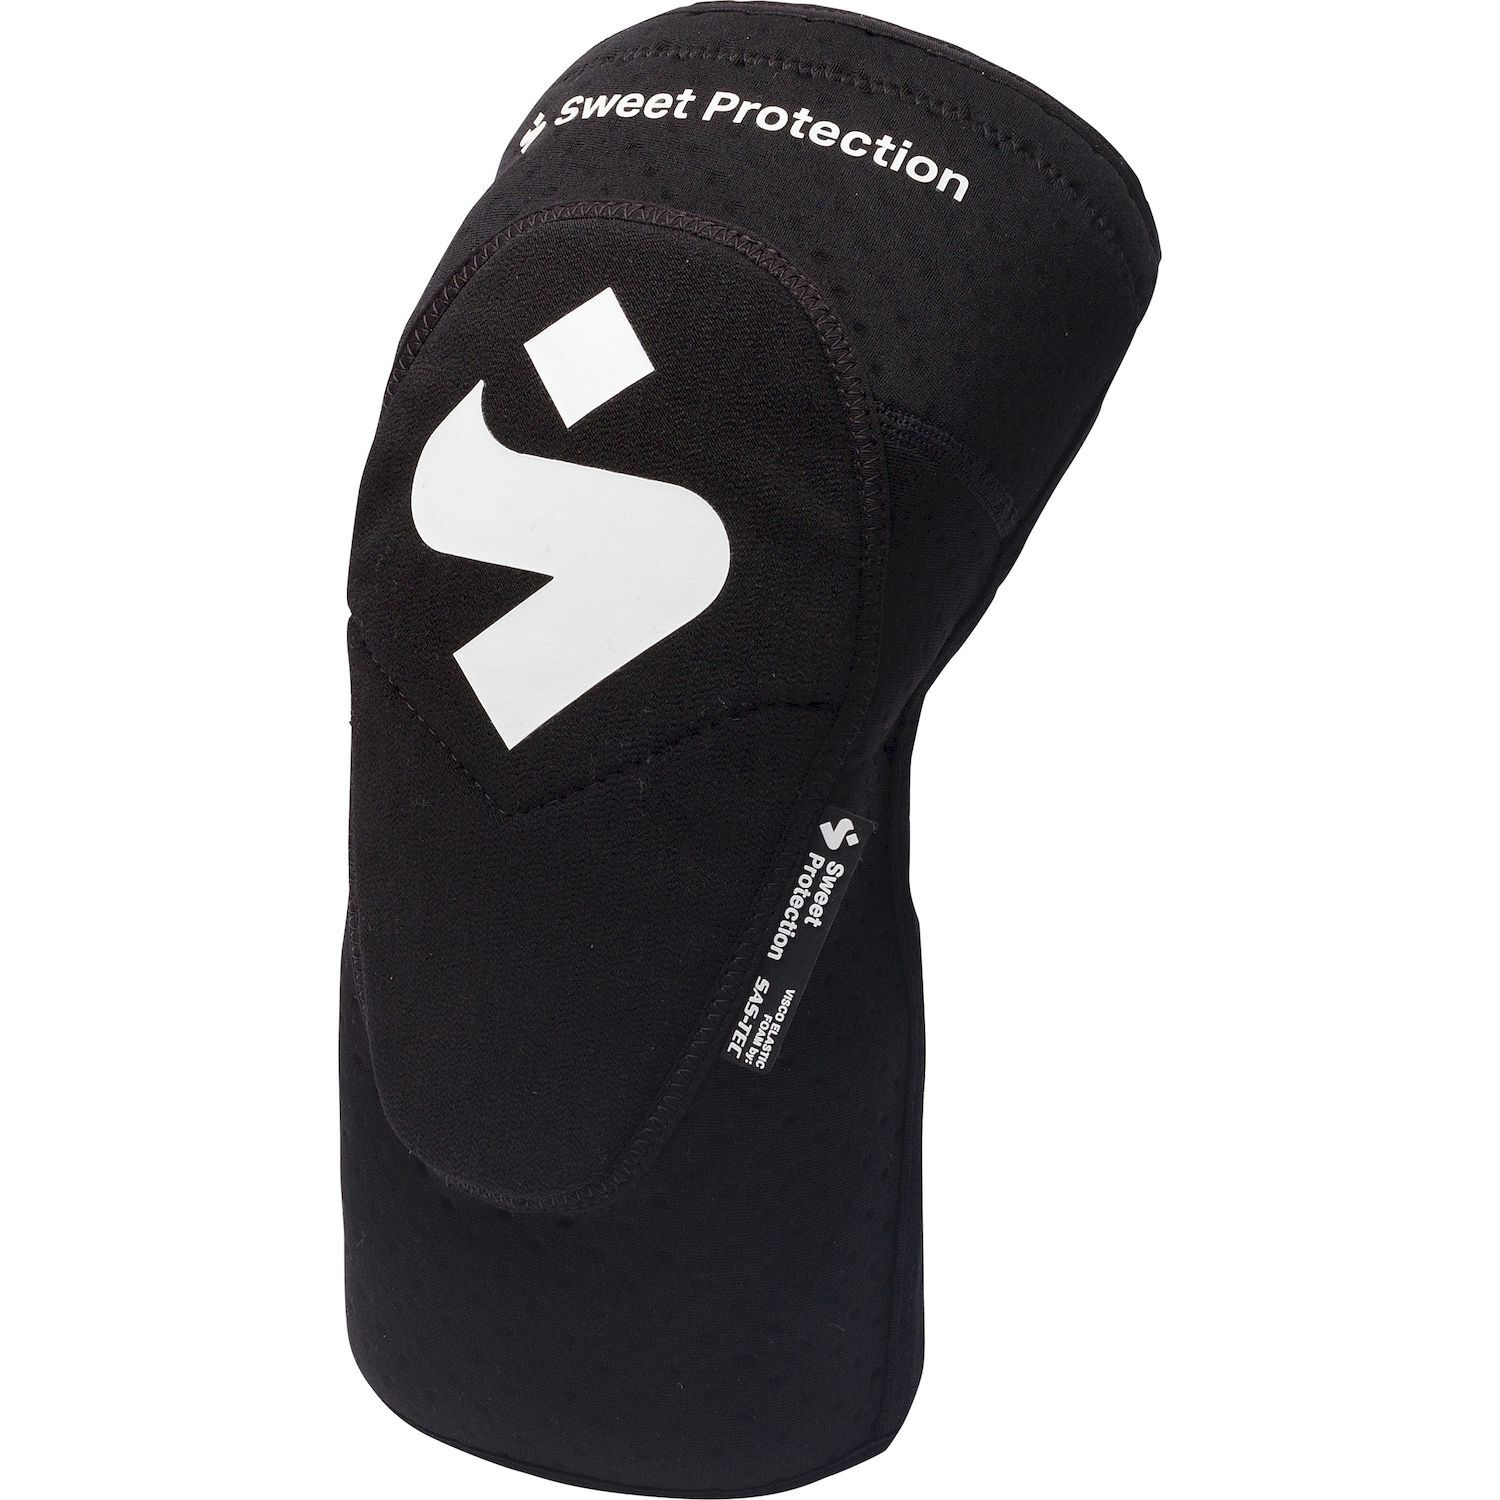 Sweet Protection Knee Guards - Knæbeskytter